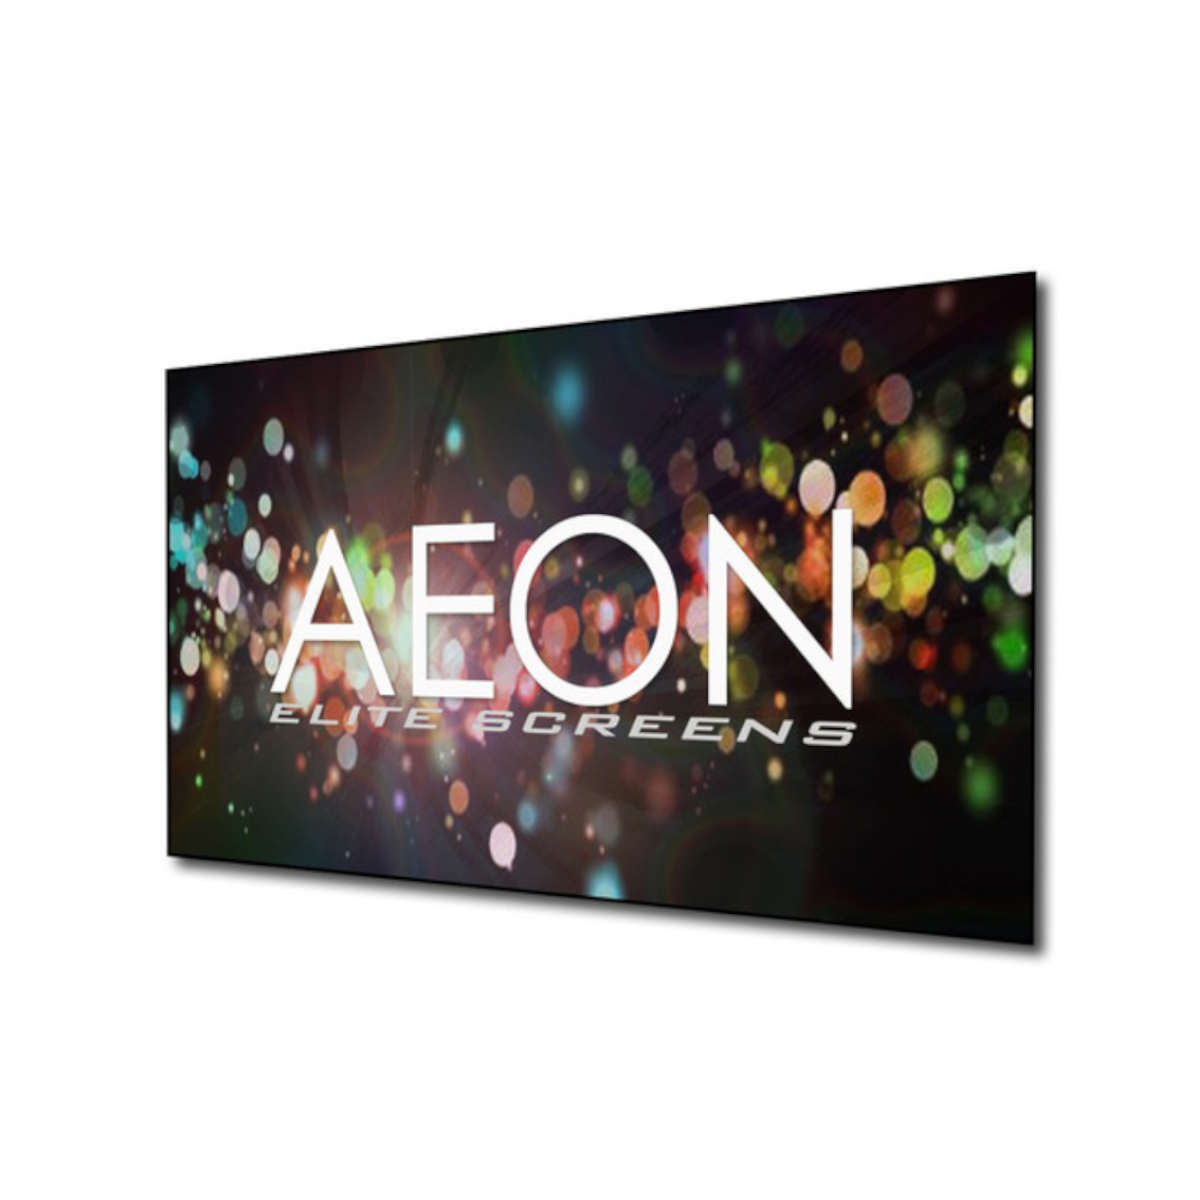 Elite Aeon CineGrey 3D Fixed Frame Projection Screen 165” 16:9 (AR165DHD3) - Ooberpad India